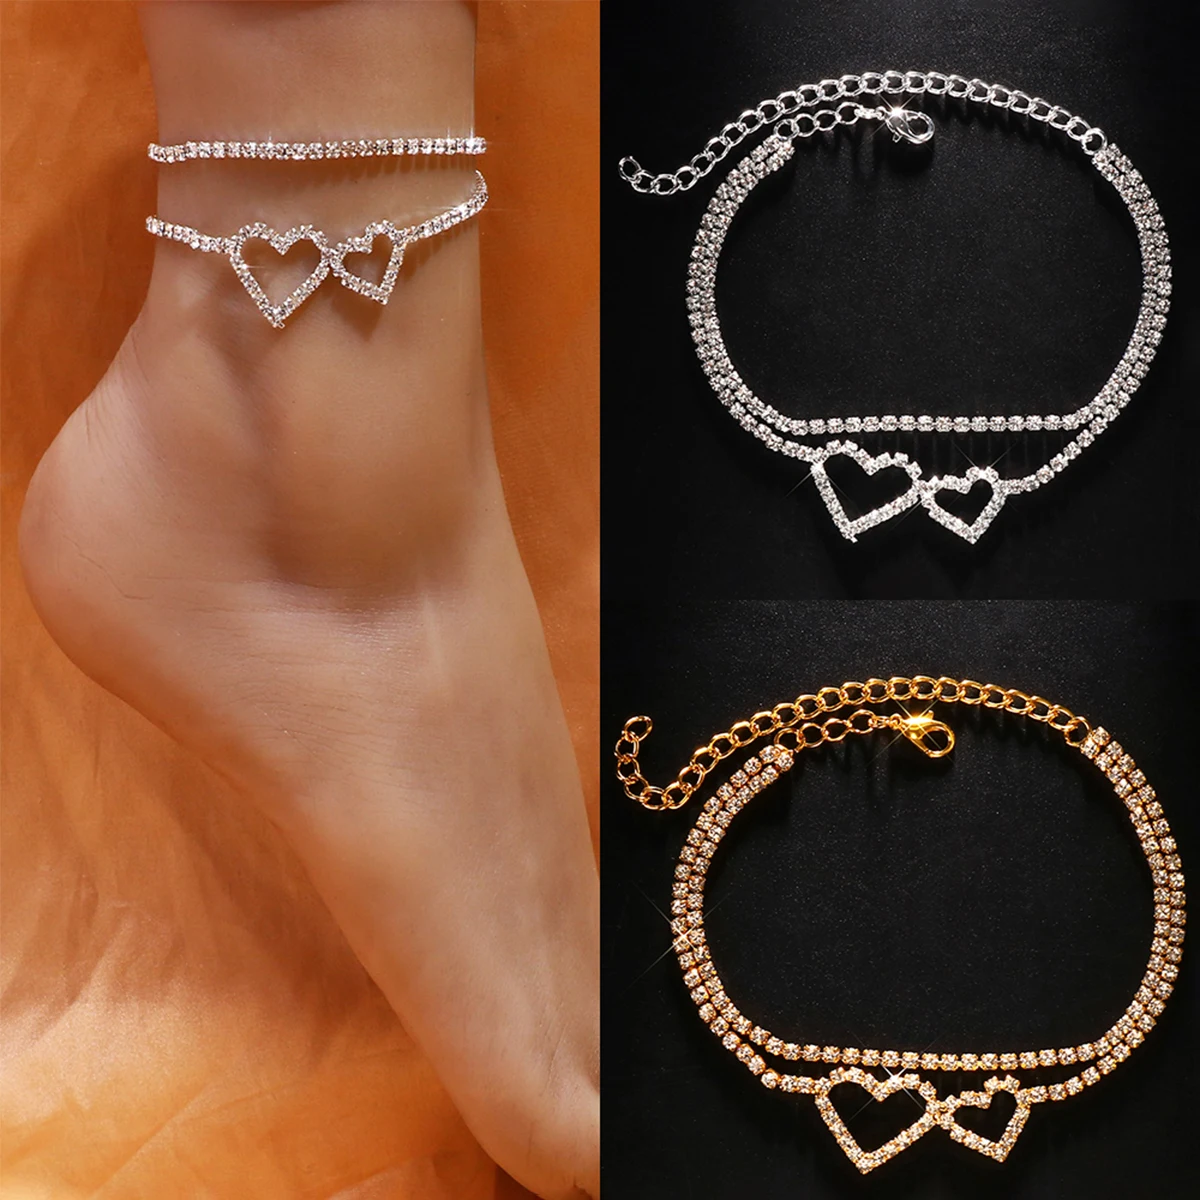 Shiny cubic zirconia chain women's ankle fashionable gold and silver color ankle chain beach ankle chain